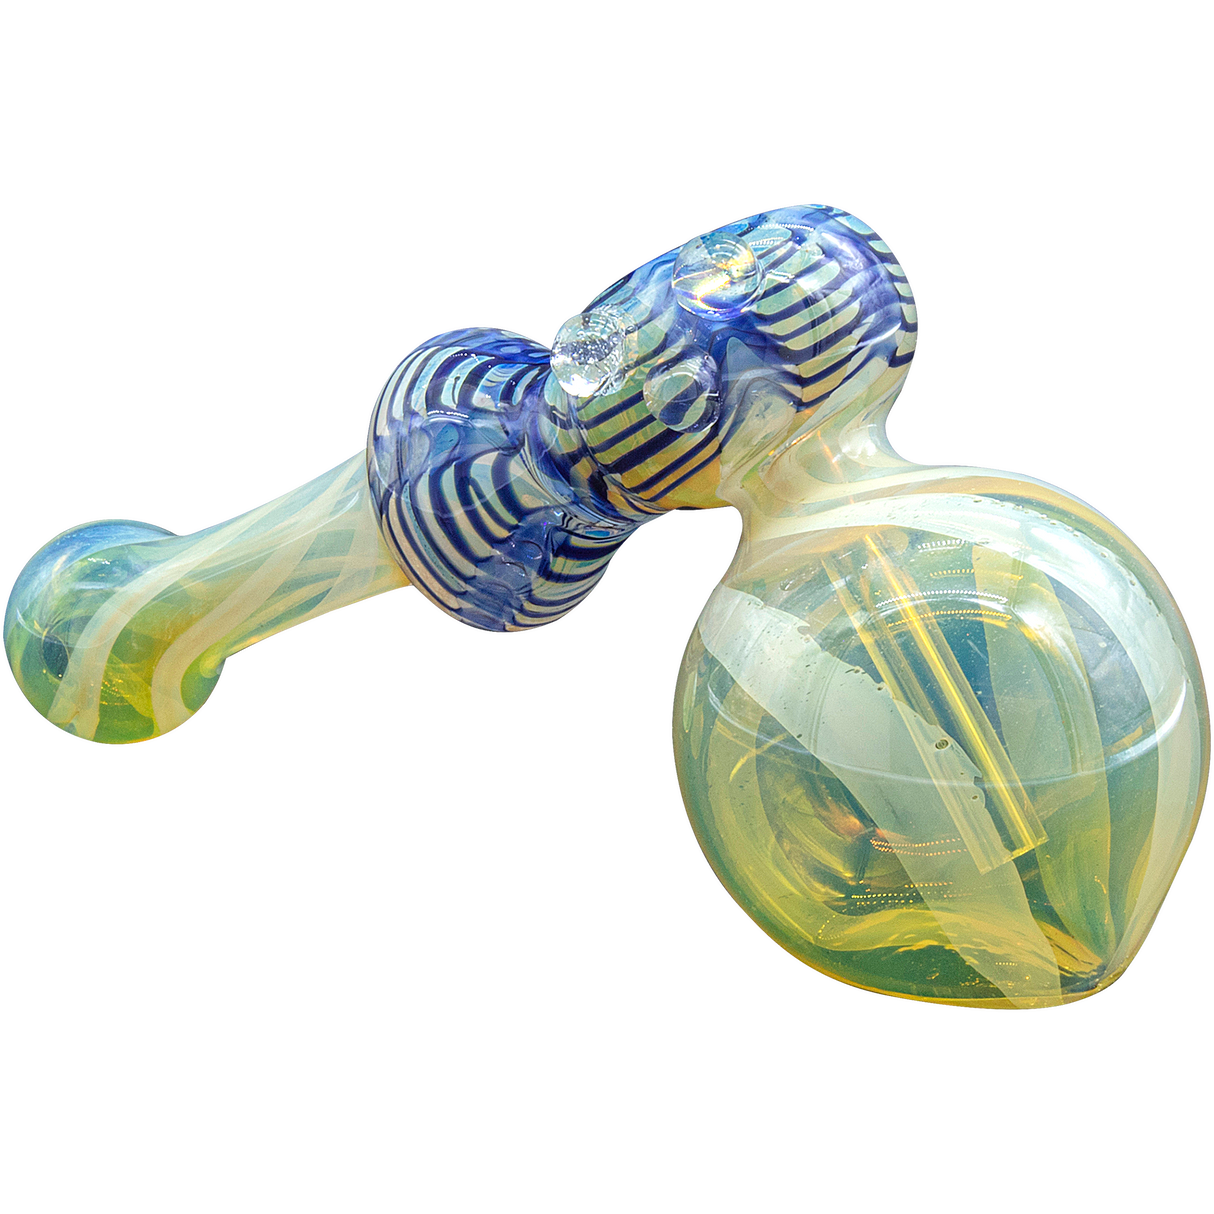 LA Pipes "Raked Hammer" Fumed Hammer Bubbler Pipe in Blue, Side View on White Background